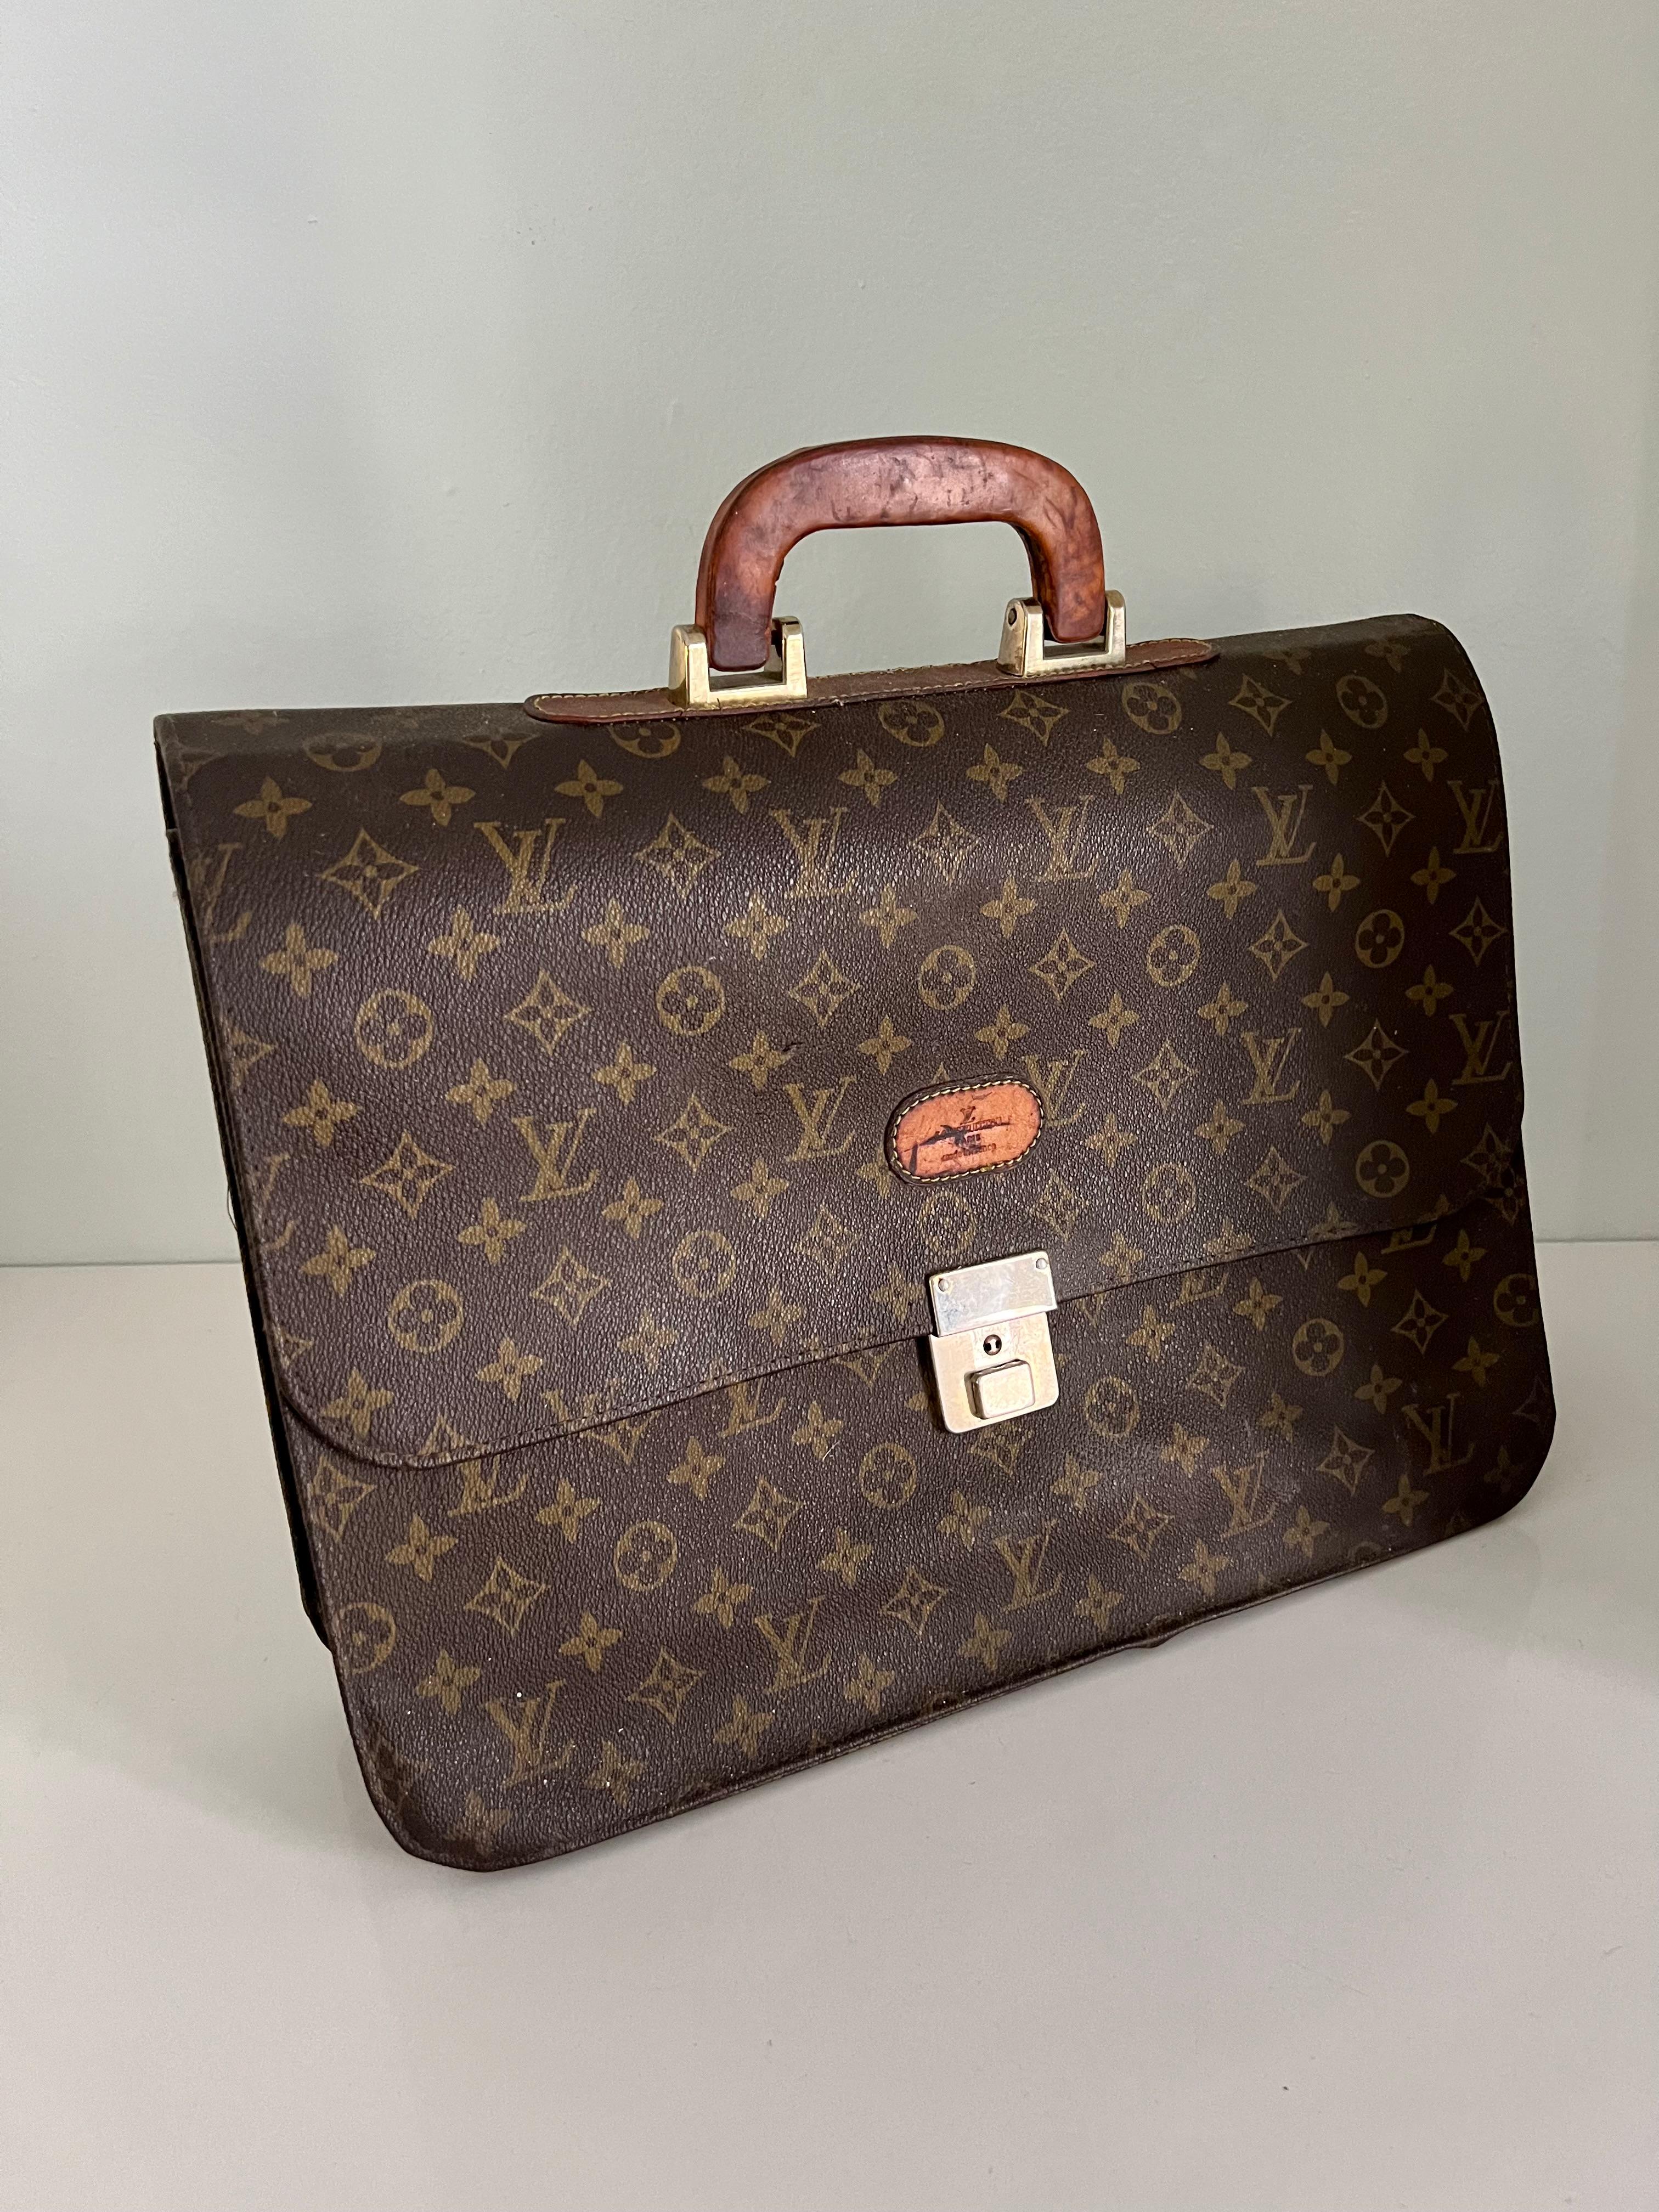 Classic vintage Louis Vuitton monogram serviette conseiller accordion-style briefcase. Carry documents in style with this brown bag with three compartments and a zippered portion for keeping things organized. Leather handle. No key.

The piece is